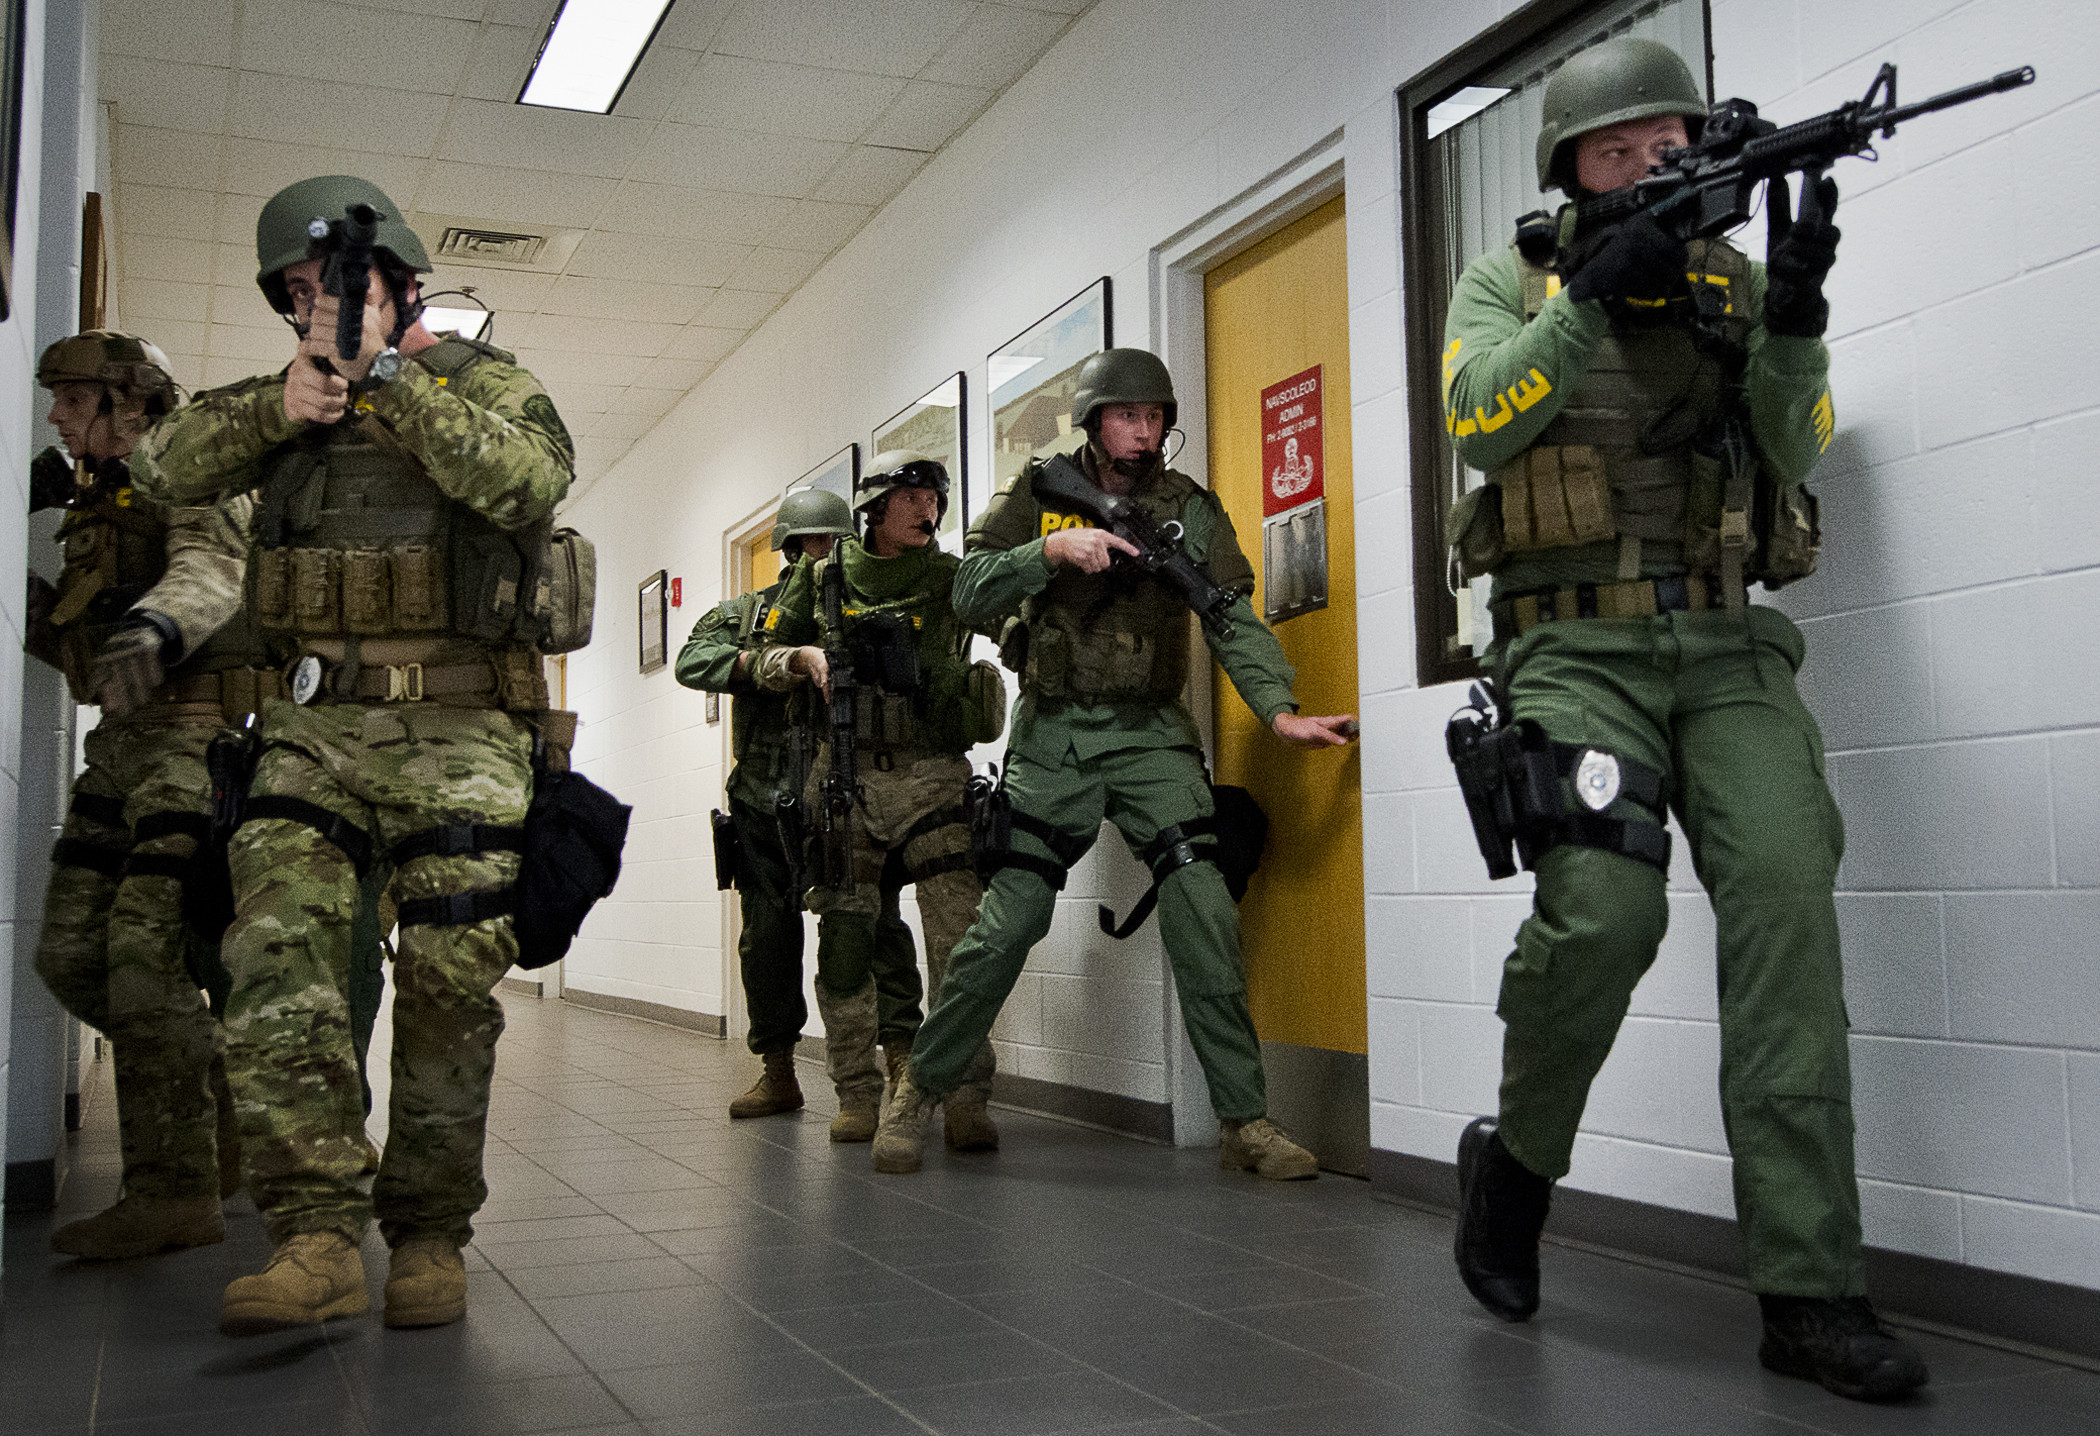 2100x1436 File:Active shooter exercise at Navy EOD school 131203-F-oc707-000